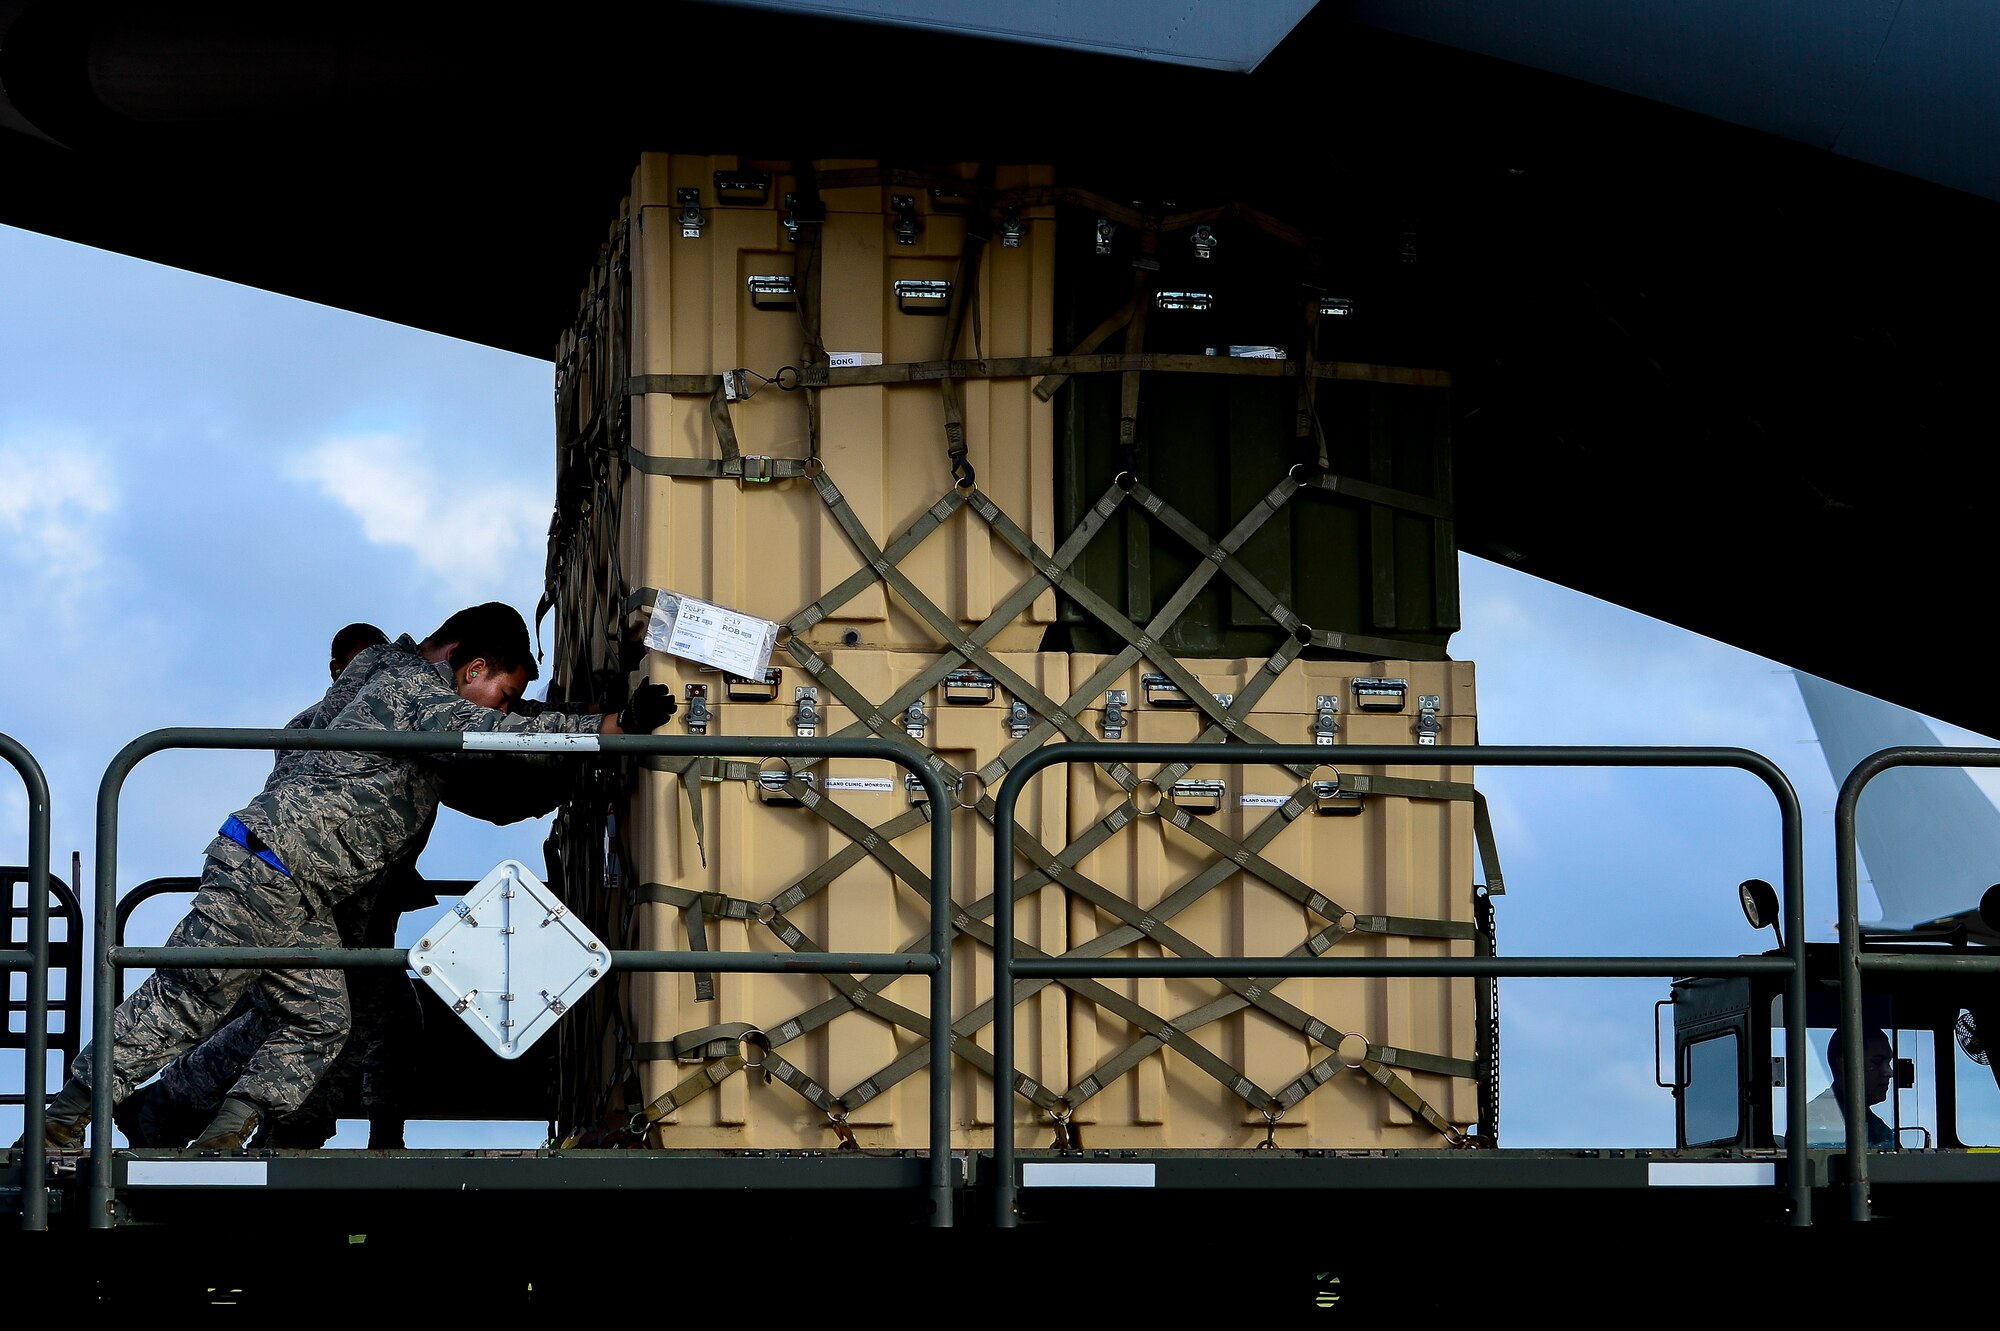 U.S. Air Force Airmen load cargo onto a C-17 Globemaster at Langley Air Force Base, Va., Sept. 26, 2014. The C-17 was used to ship the Air Force’s Expeditionary Medical Support System, a modular and customizable treatment facility designed for austere conditions.  (U.S. Air Force photo by Senior Airman Kayla Newman/Released)